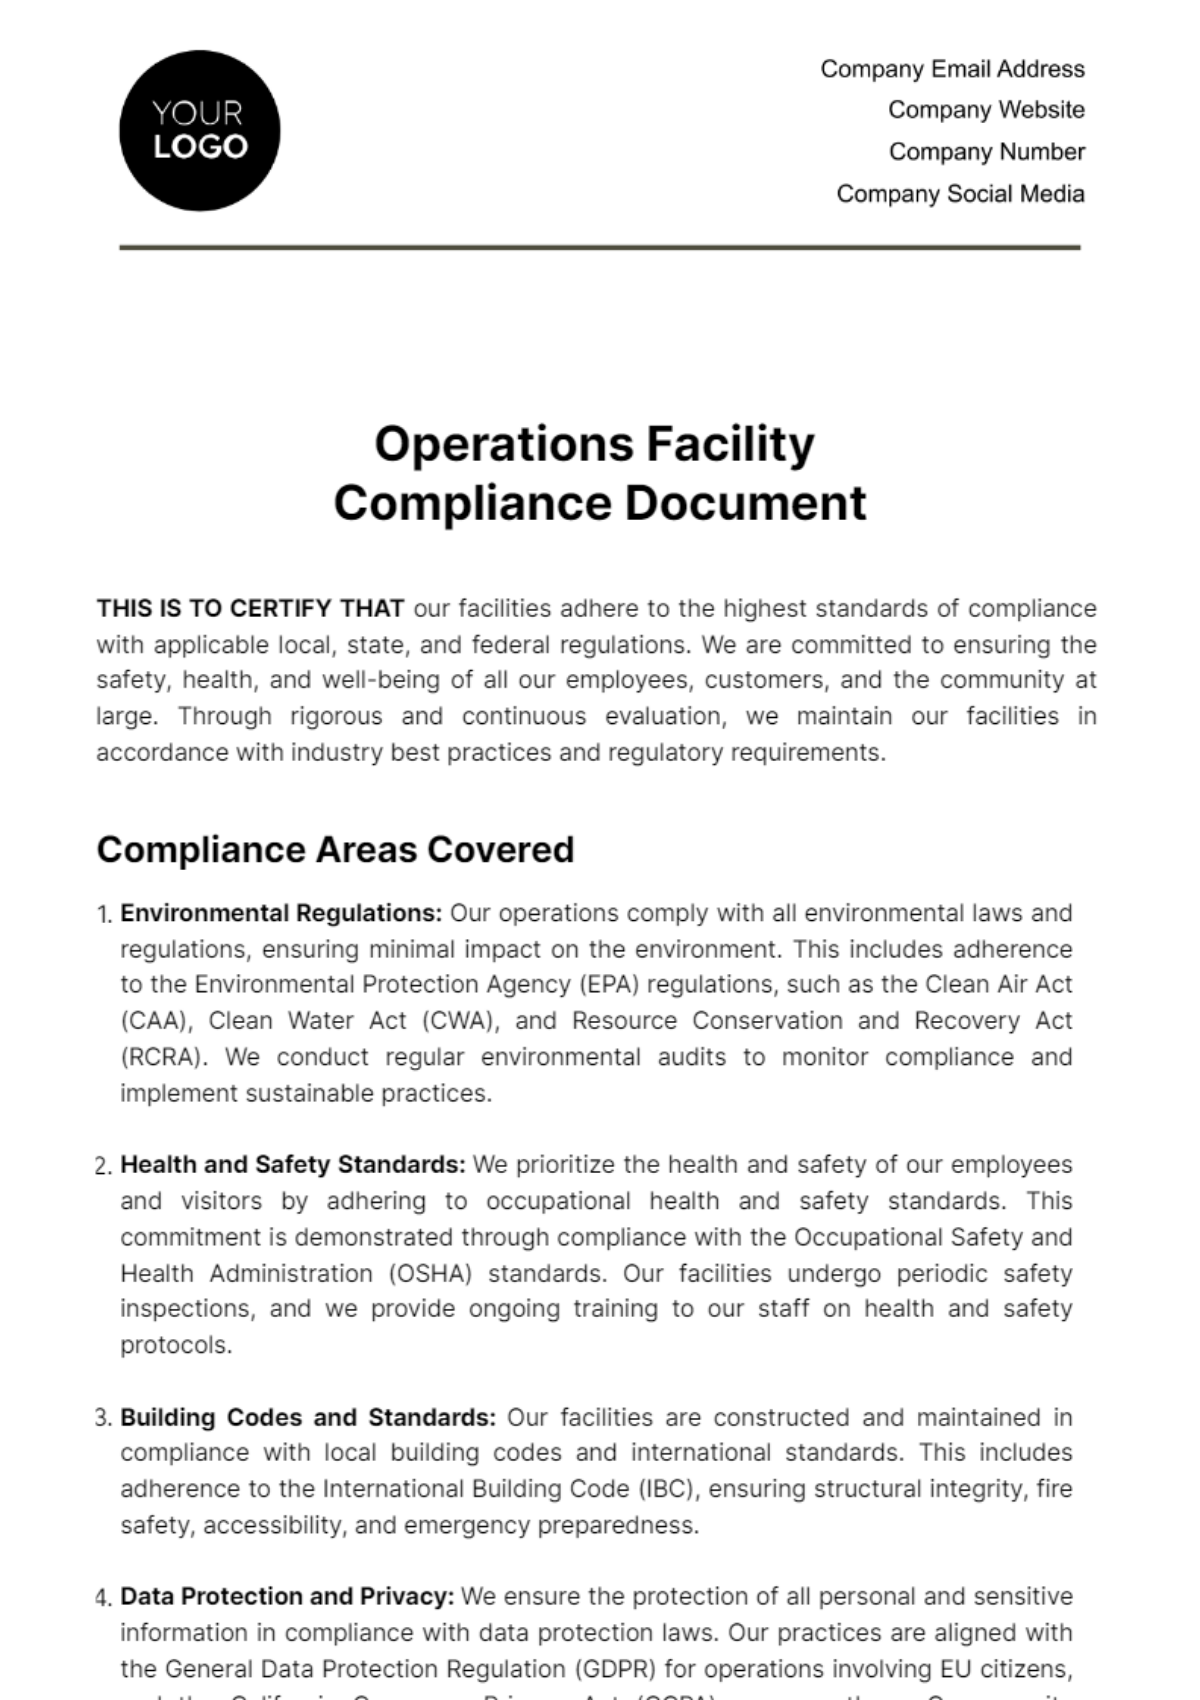 Free Operations Facility Compliance Document Template